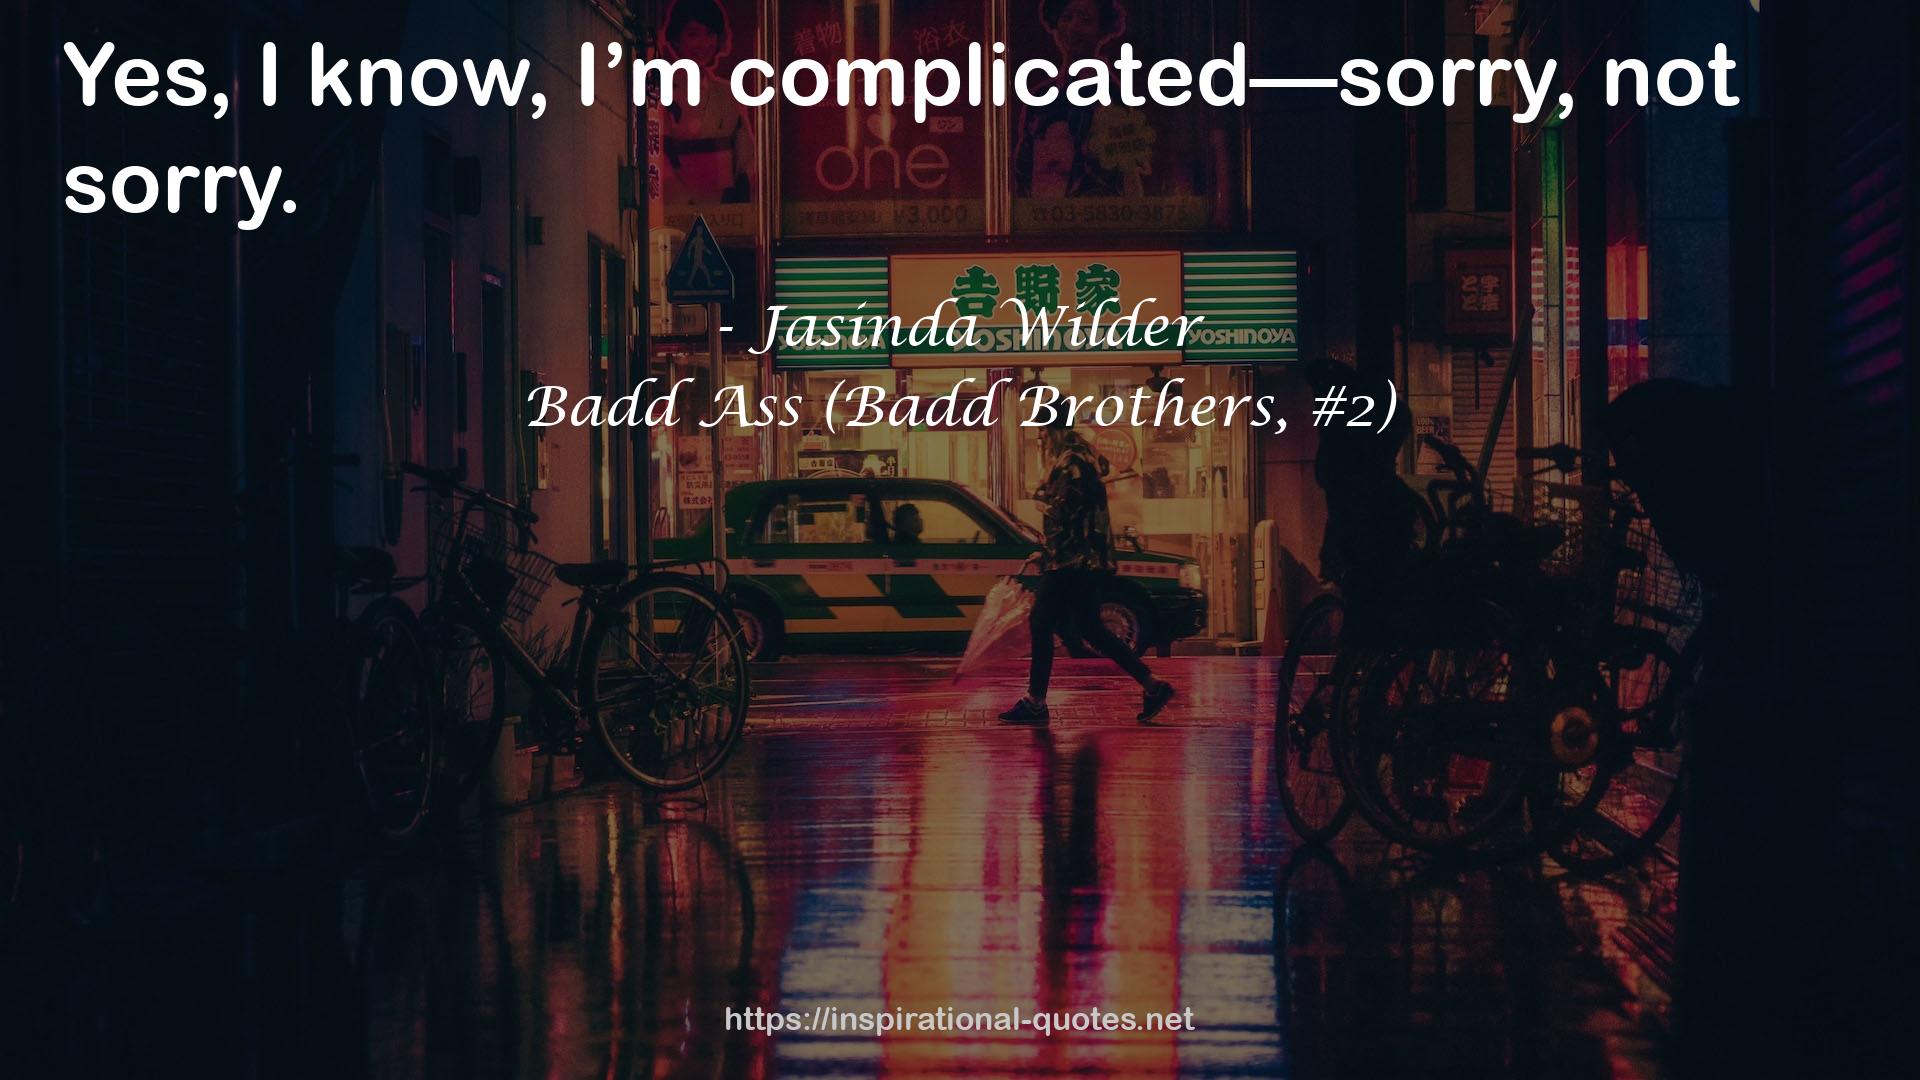 Badd Ass (Badd Brothers, #2) QUOTES